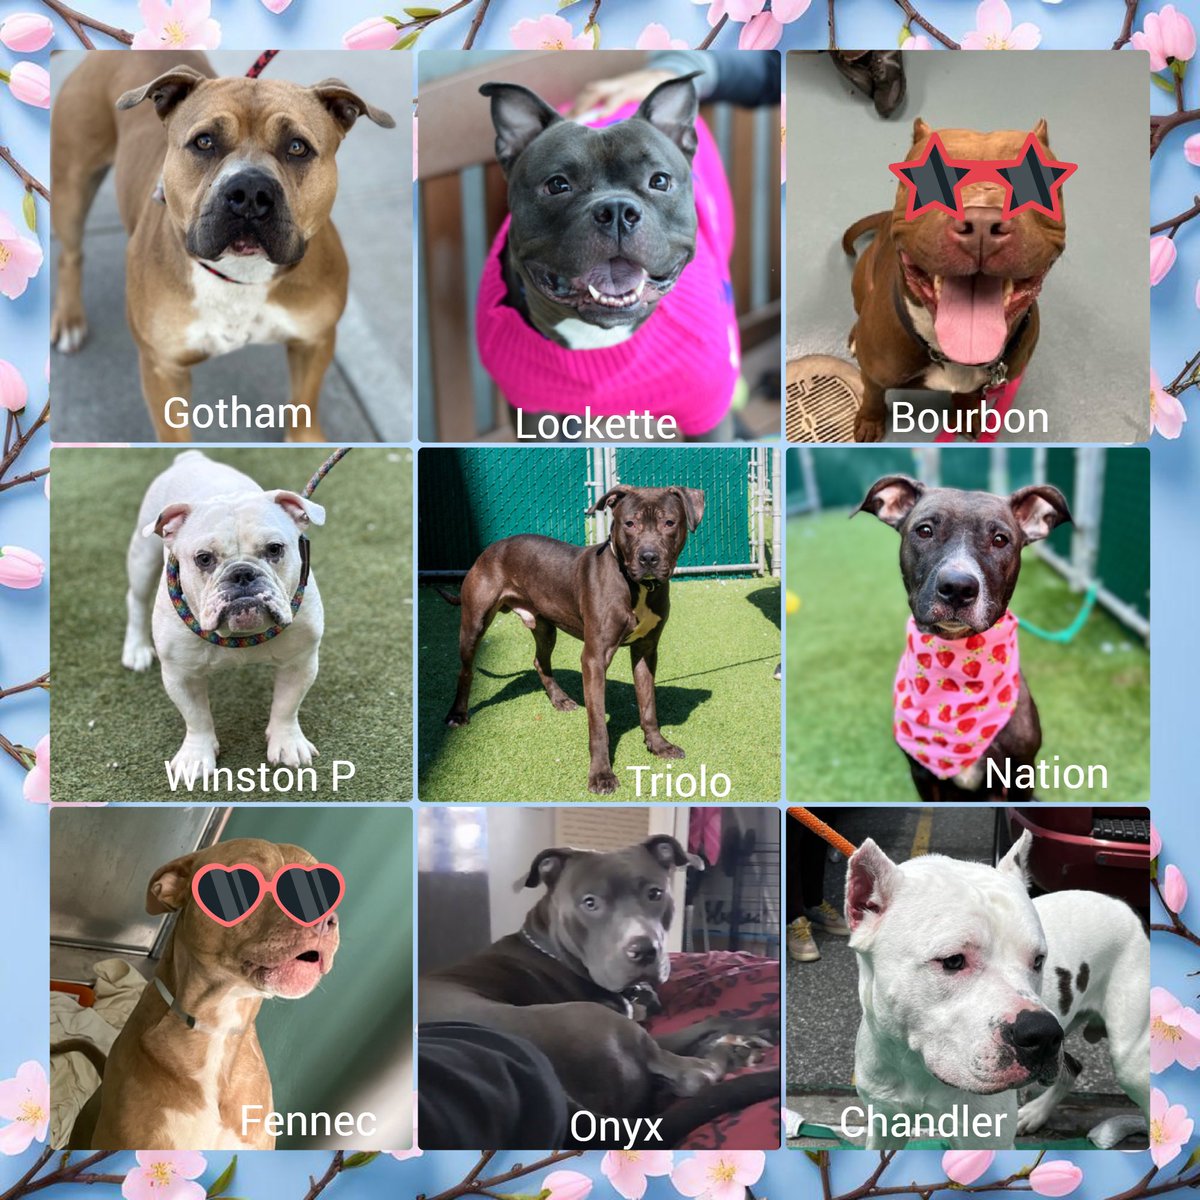 Reginald Red was killed 🐾💔 Conway was killed 🐾💔 Sandy's owner reclaimed 🚨 Gotham, Lockette, Bourbon, Winston P, Triolo, Nation, Fennec, Onyx & Chandler remain under kill command. Anyone interested DM me.